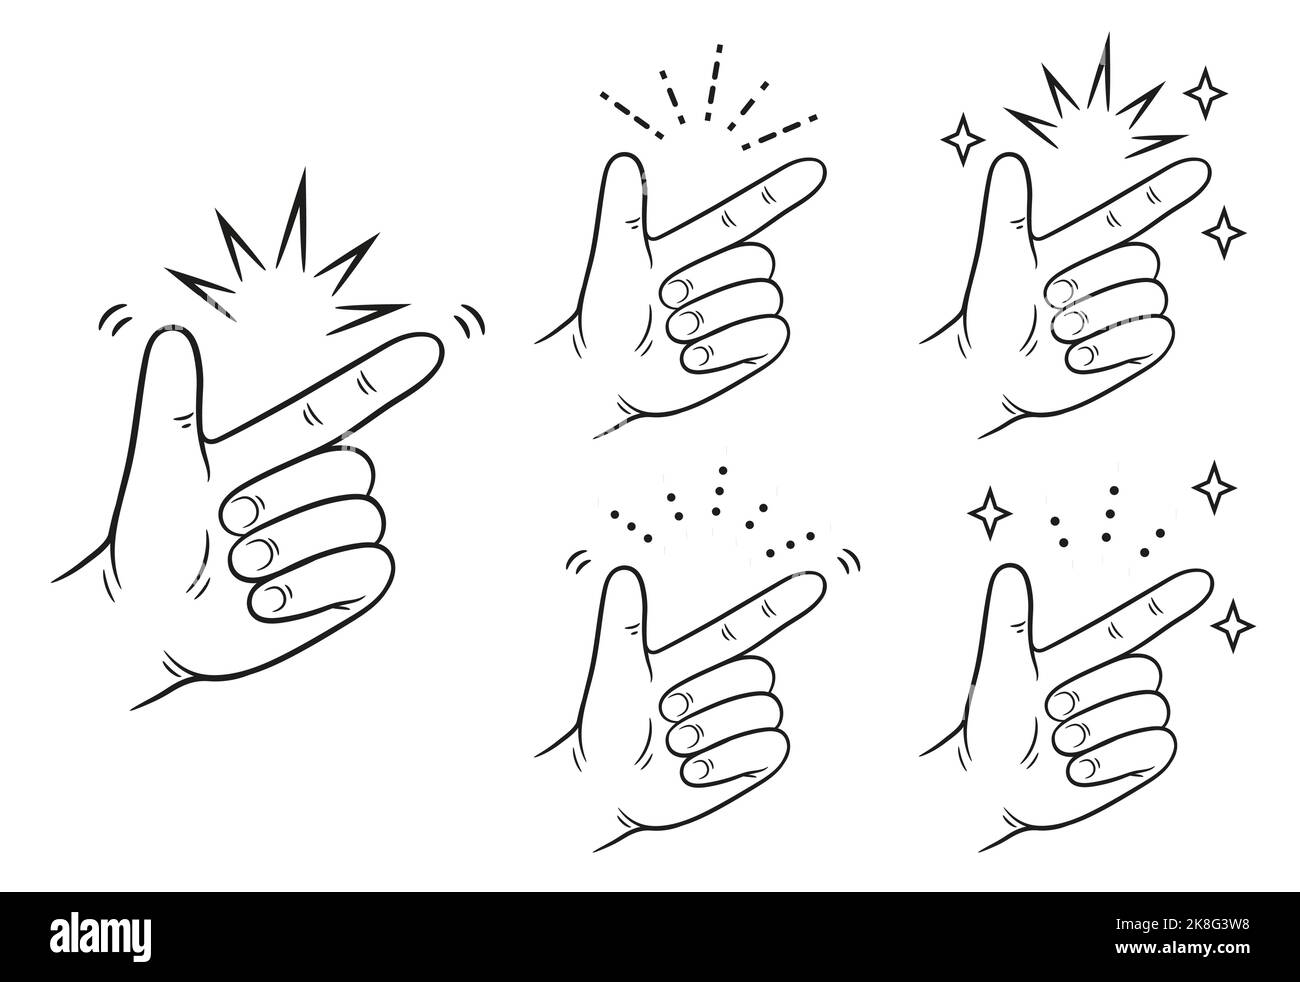 https://c8.alamy.com/comp/2K8G3W8/hand-snap-fingers-gesture-click-sound-signal-line-icon-human-arm-wrist-flick-easy-good-idea-okay-attention-grabbing-reminder-point-up-vector-2K8G3W8.jpg